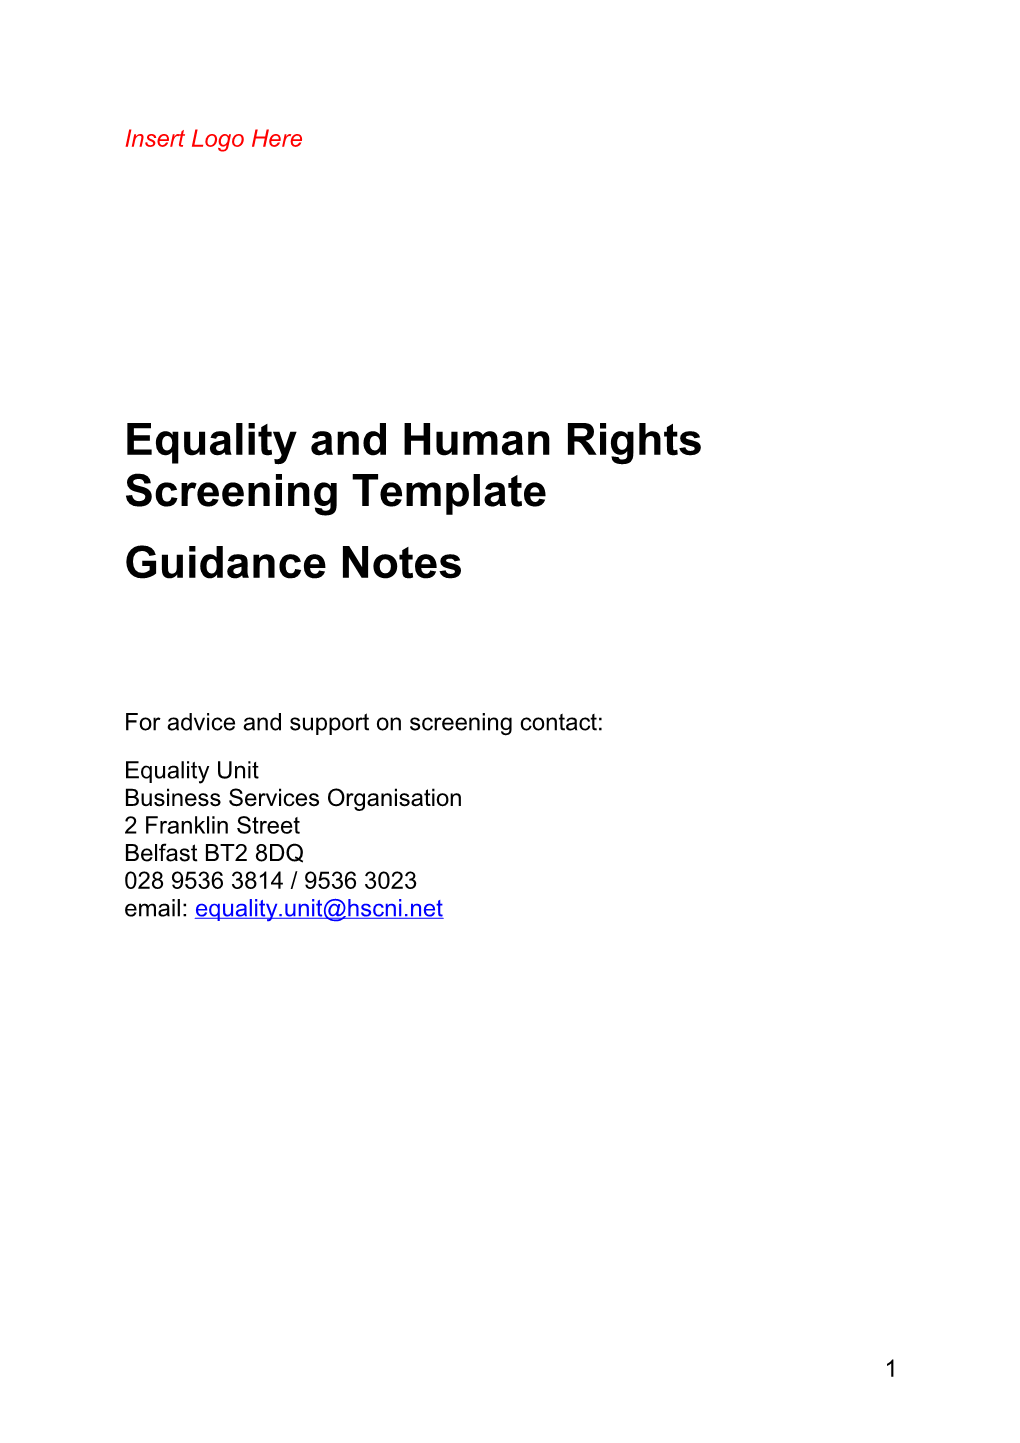 Equality and Human Rights Screening Template s1